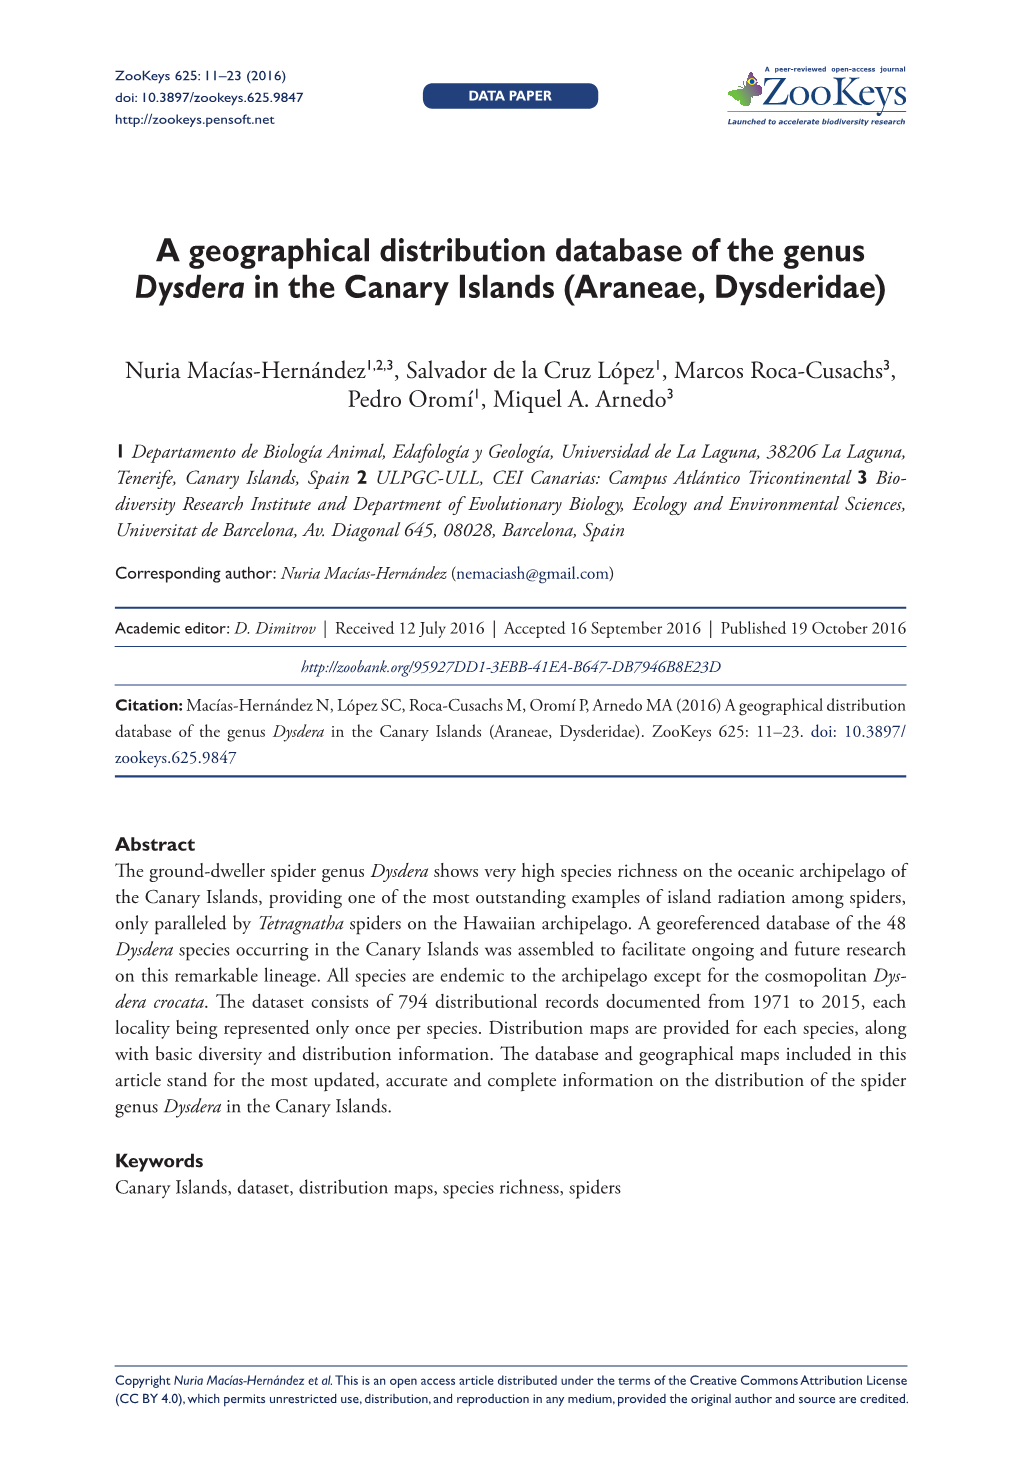 ﻿A Geographical Distribution Database of the Genus Dysdera in the Canary